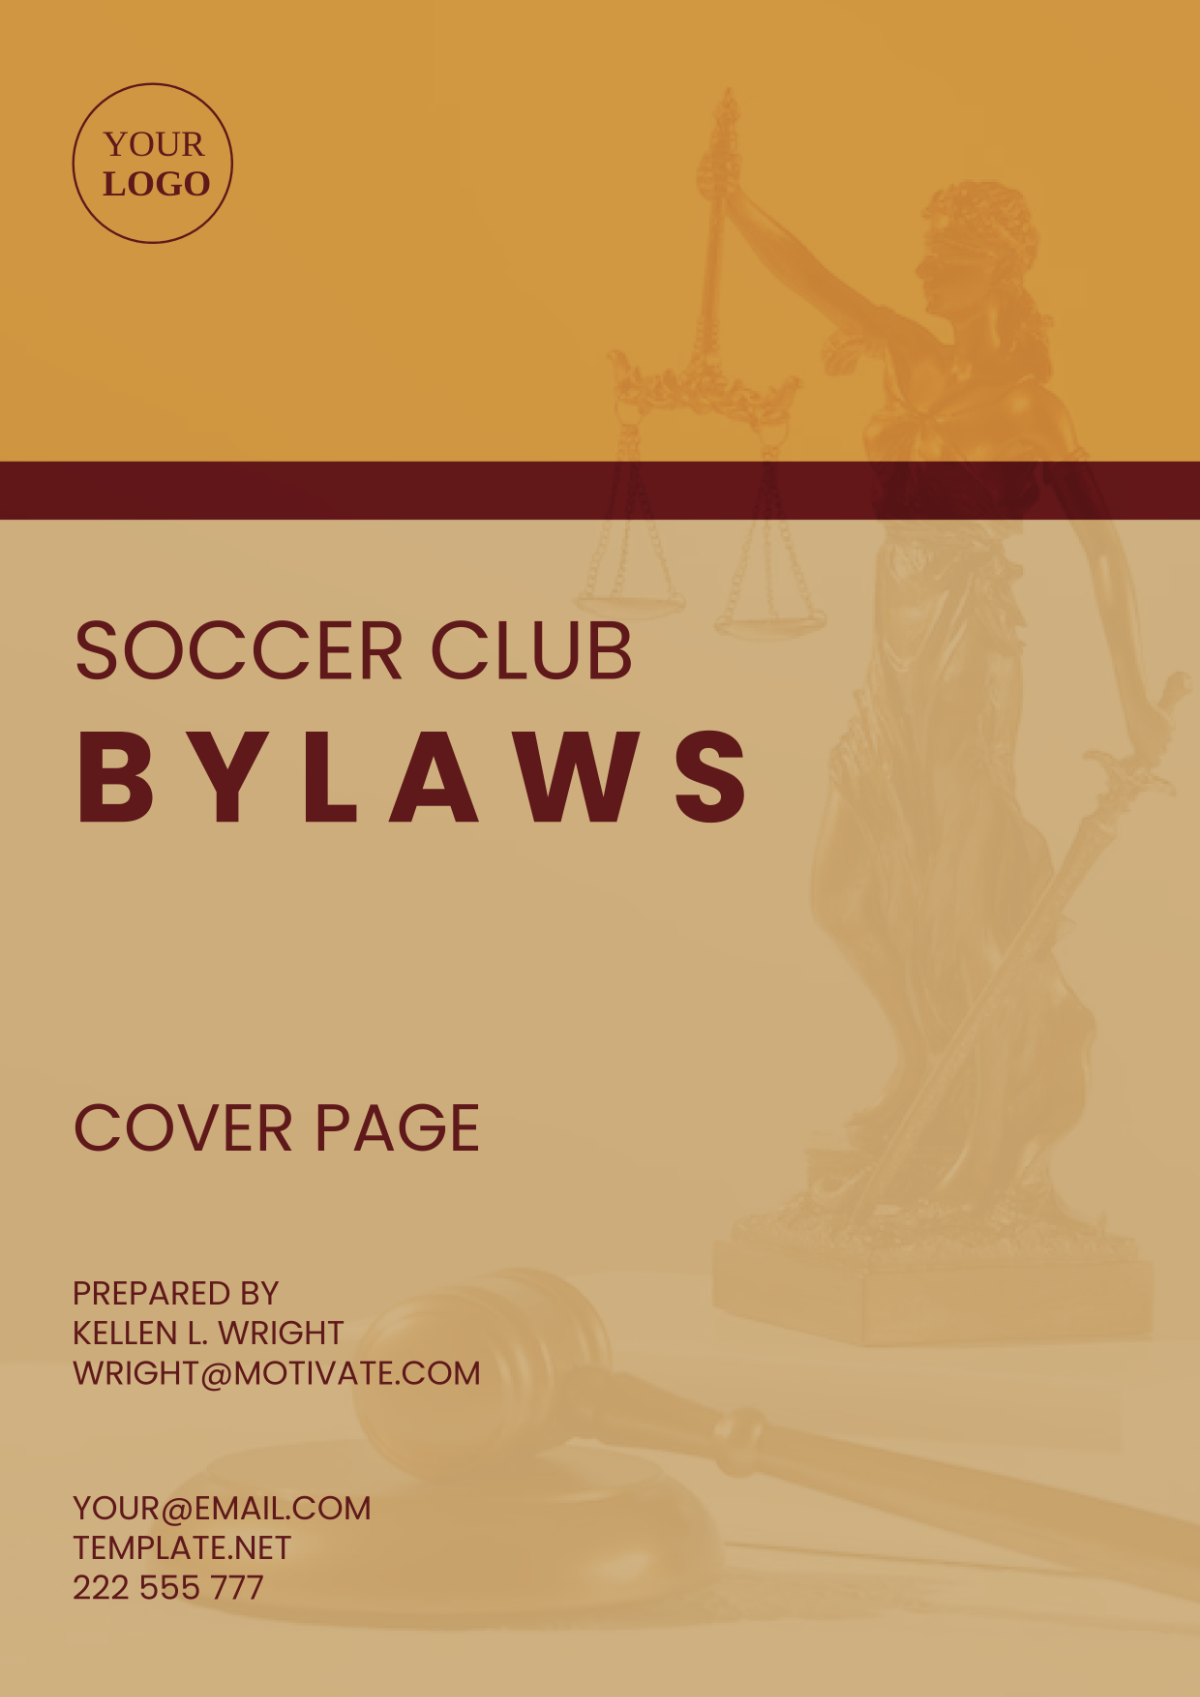 Soccer Club Bylaws Cover Page Template